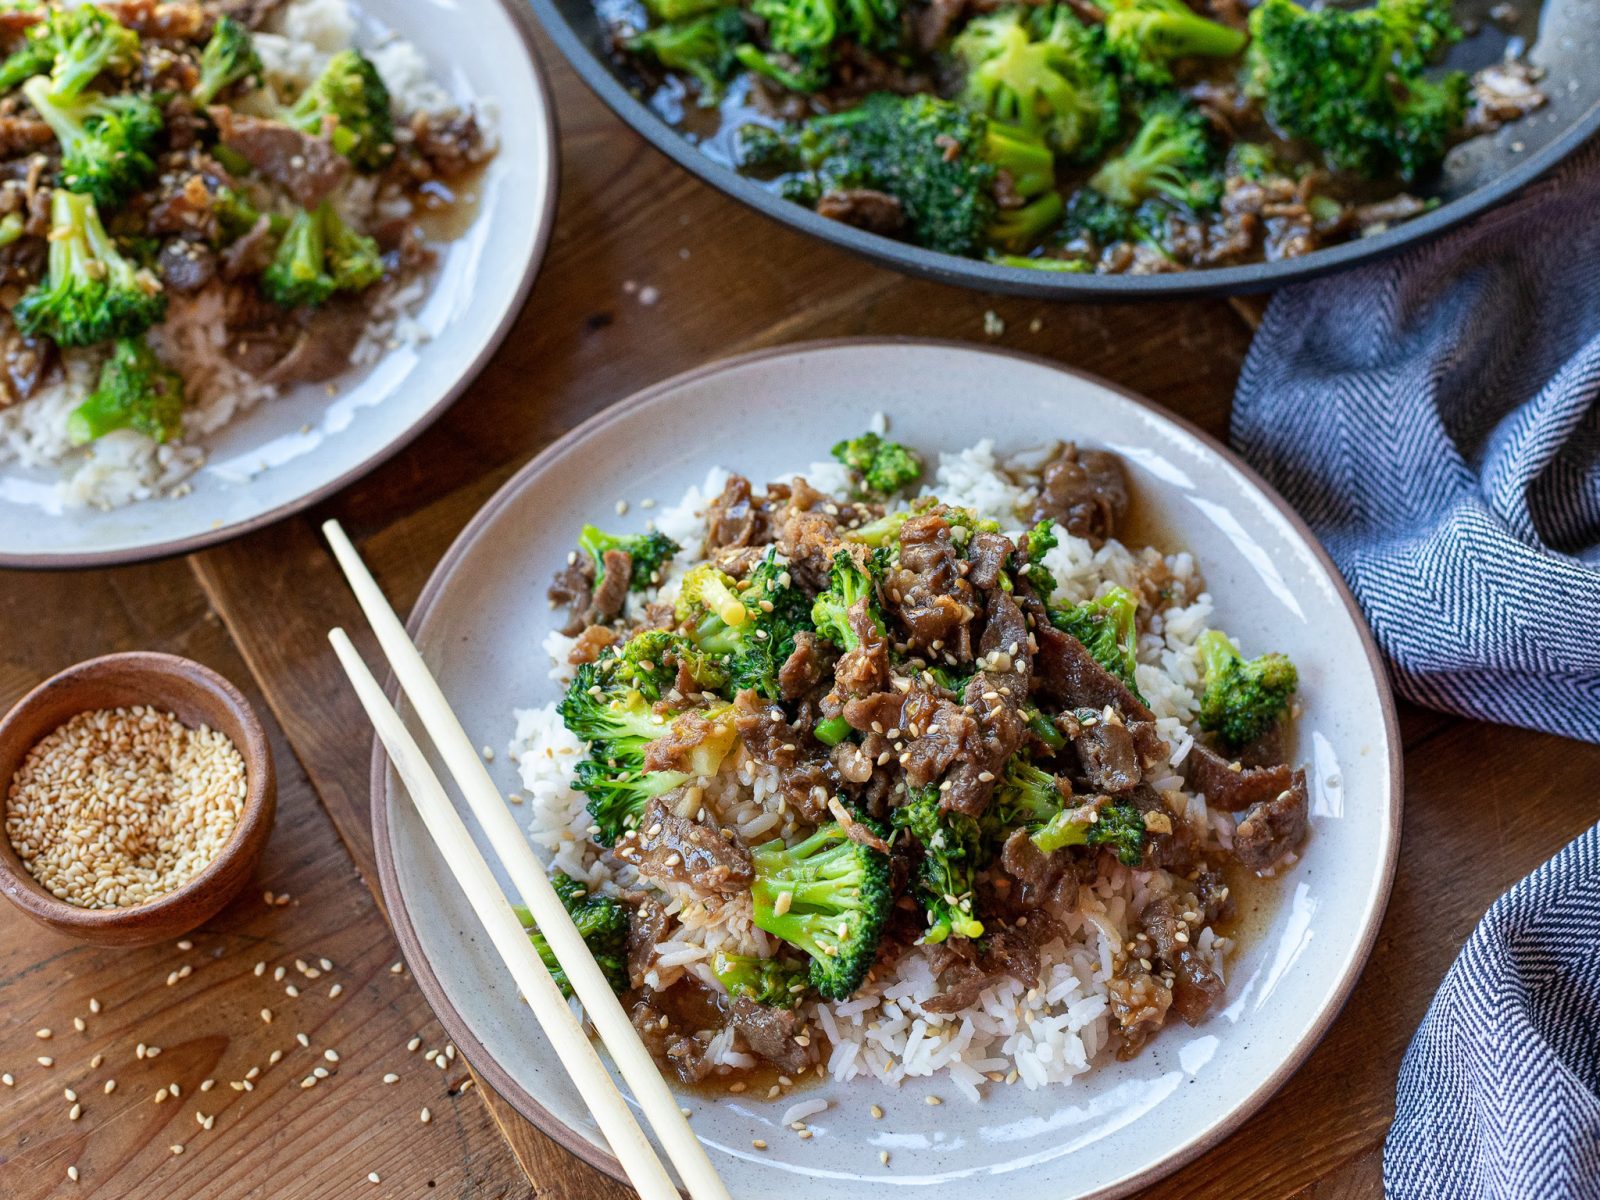 Try My 15 Minute Beef & Broccoli Recipe – Enjoy Dinner In A Flash With Gary’s QuickSteak (Plus Enter My Giveaway!)